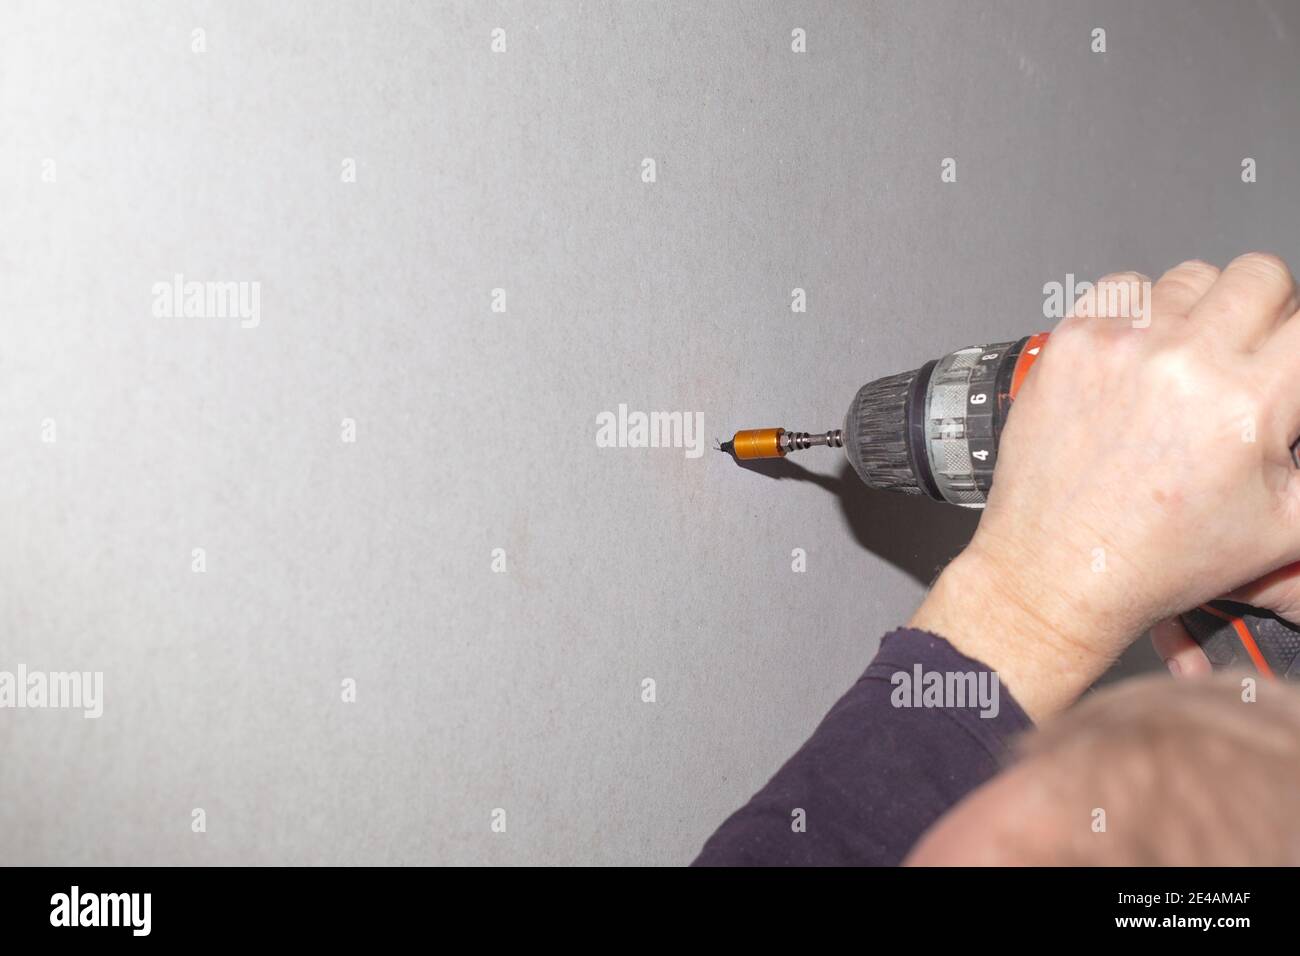 A man uses a screwdriver to screw a screw into a drywall. Home renovation, wall cladding. Stock Photo